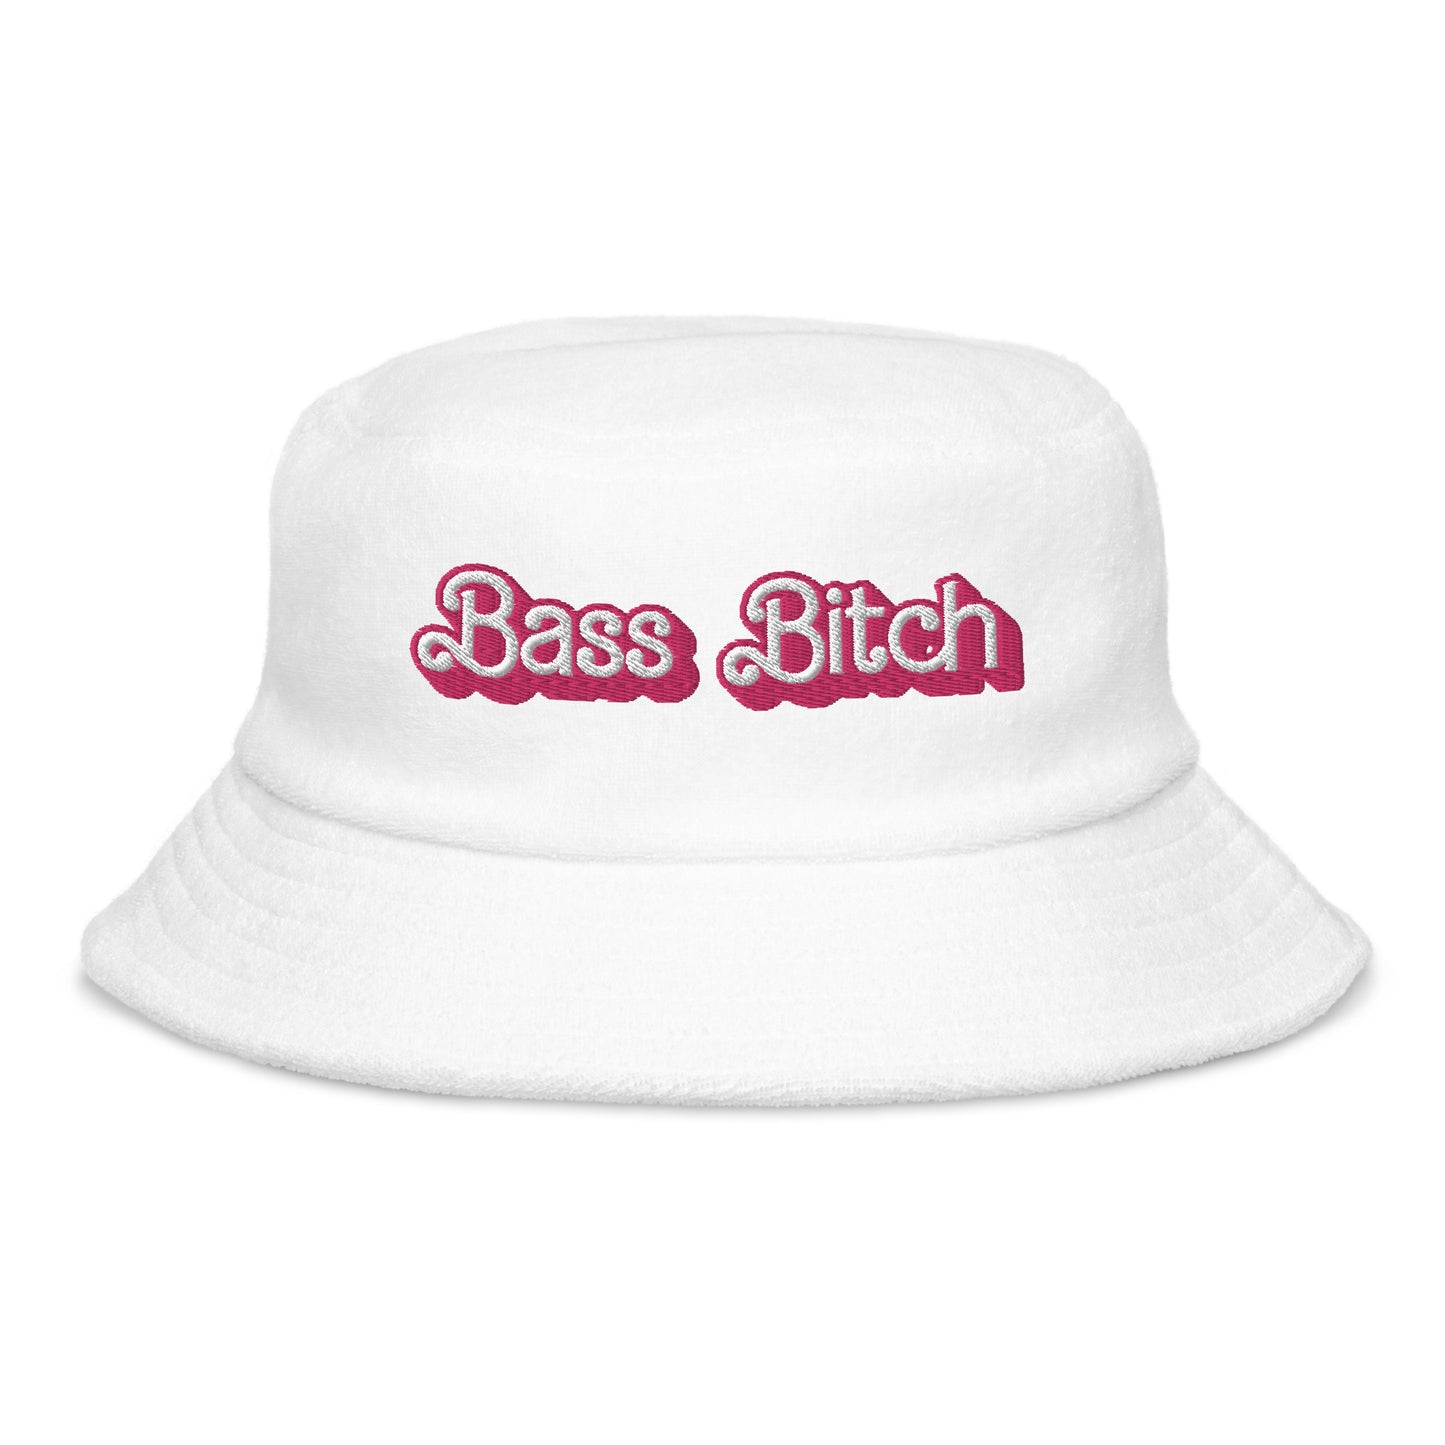 Dolly Font Bass Bitch Pastel Unisex Embroidered Terry Cloth Bucket Hat